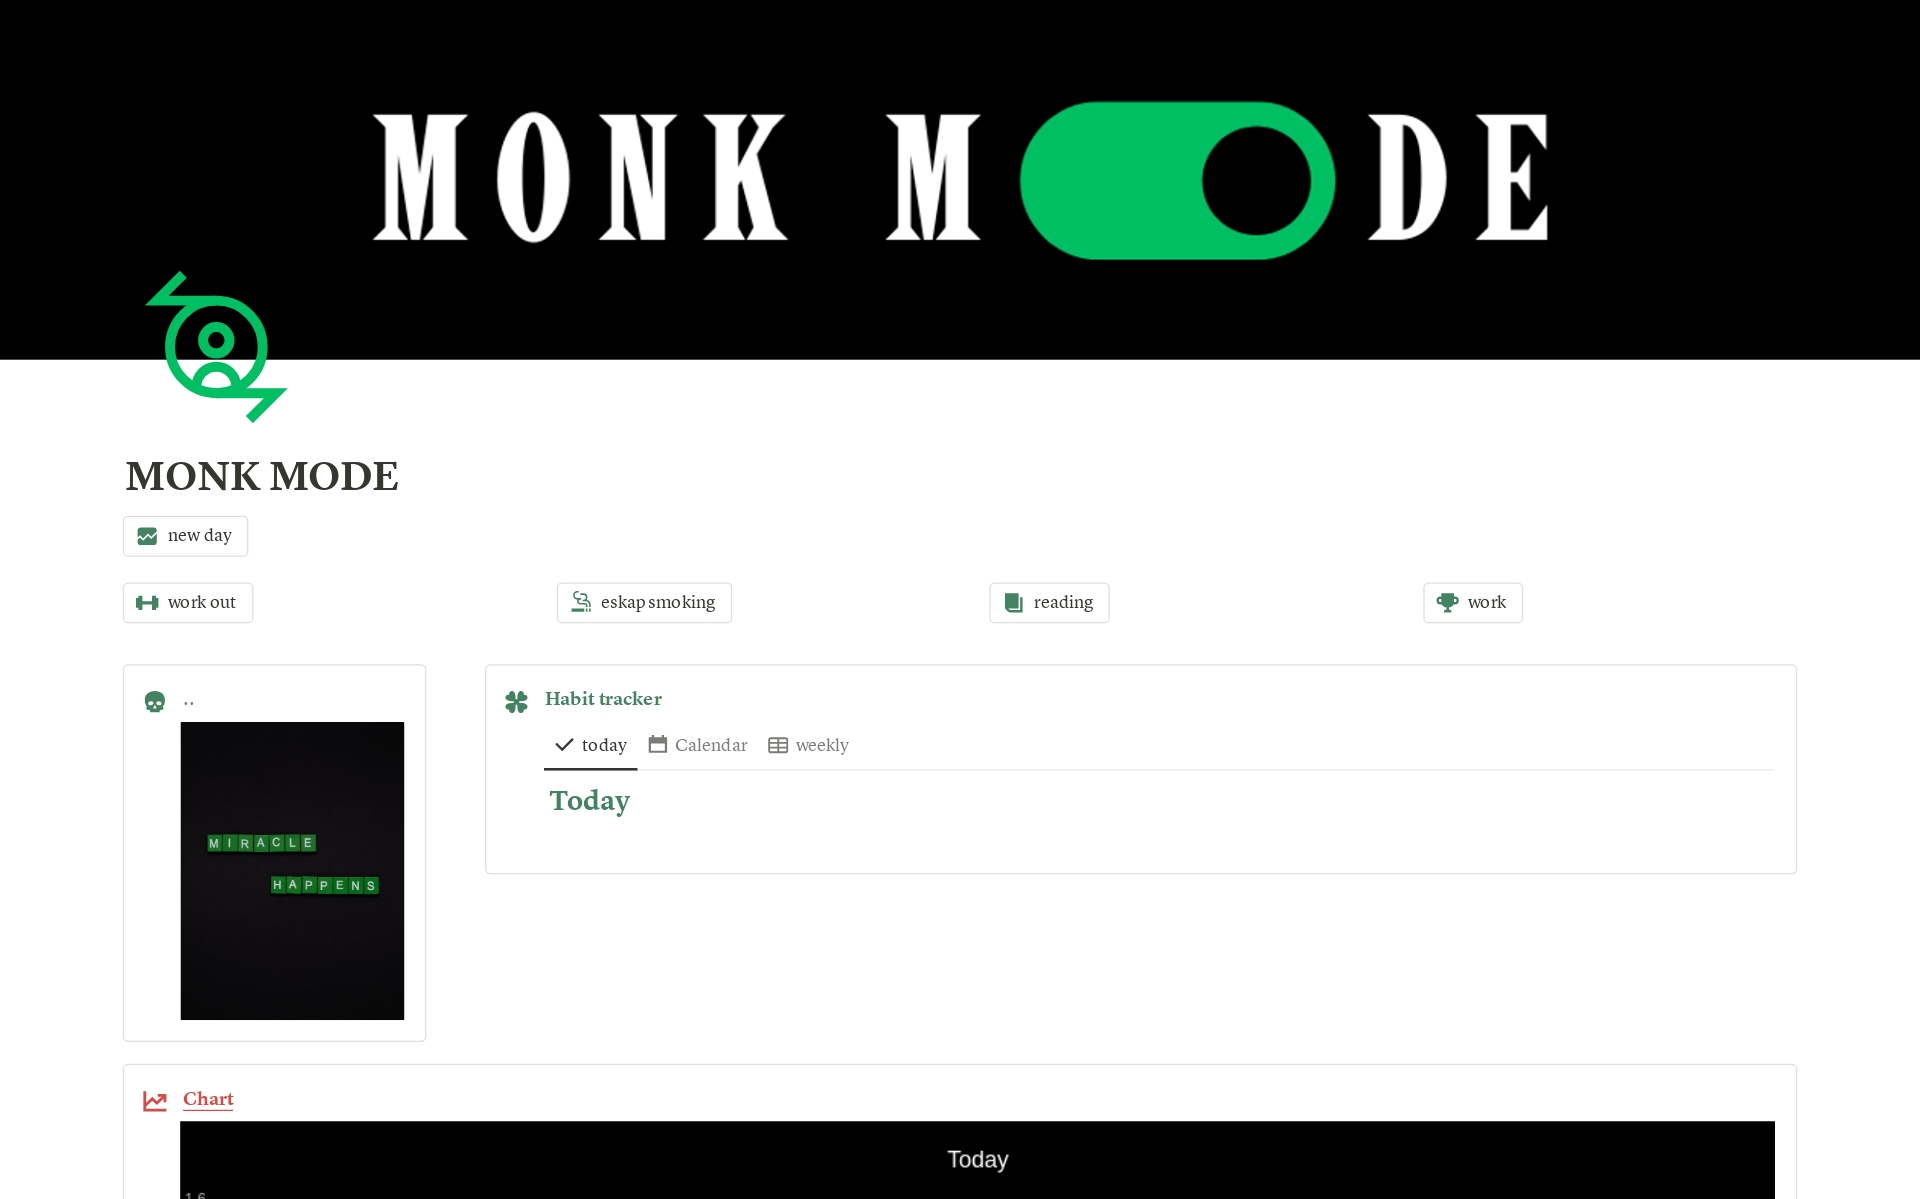 Presenting "Monk Mode" – The Dynamic Notion Habit Tracker for Your Daily Routines.